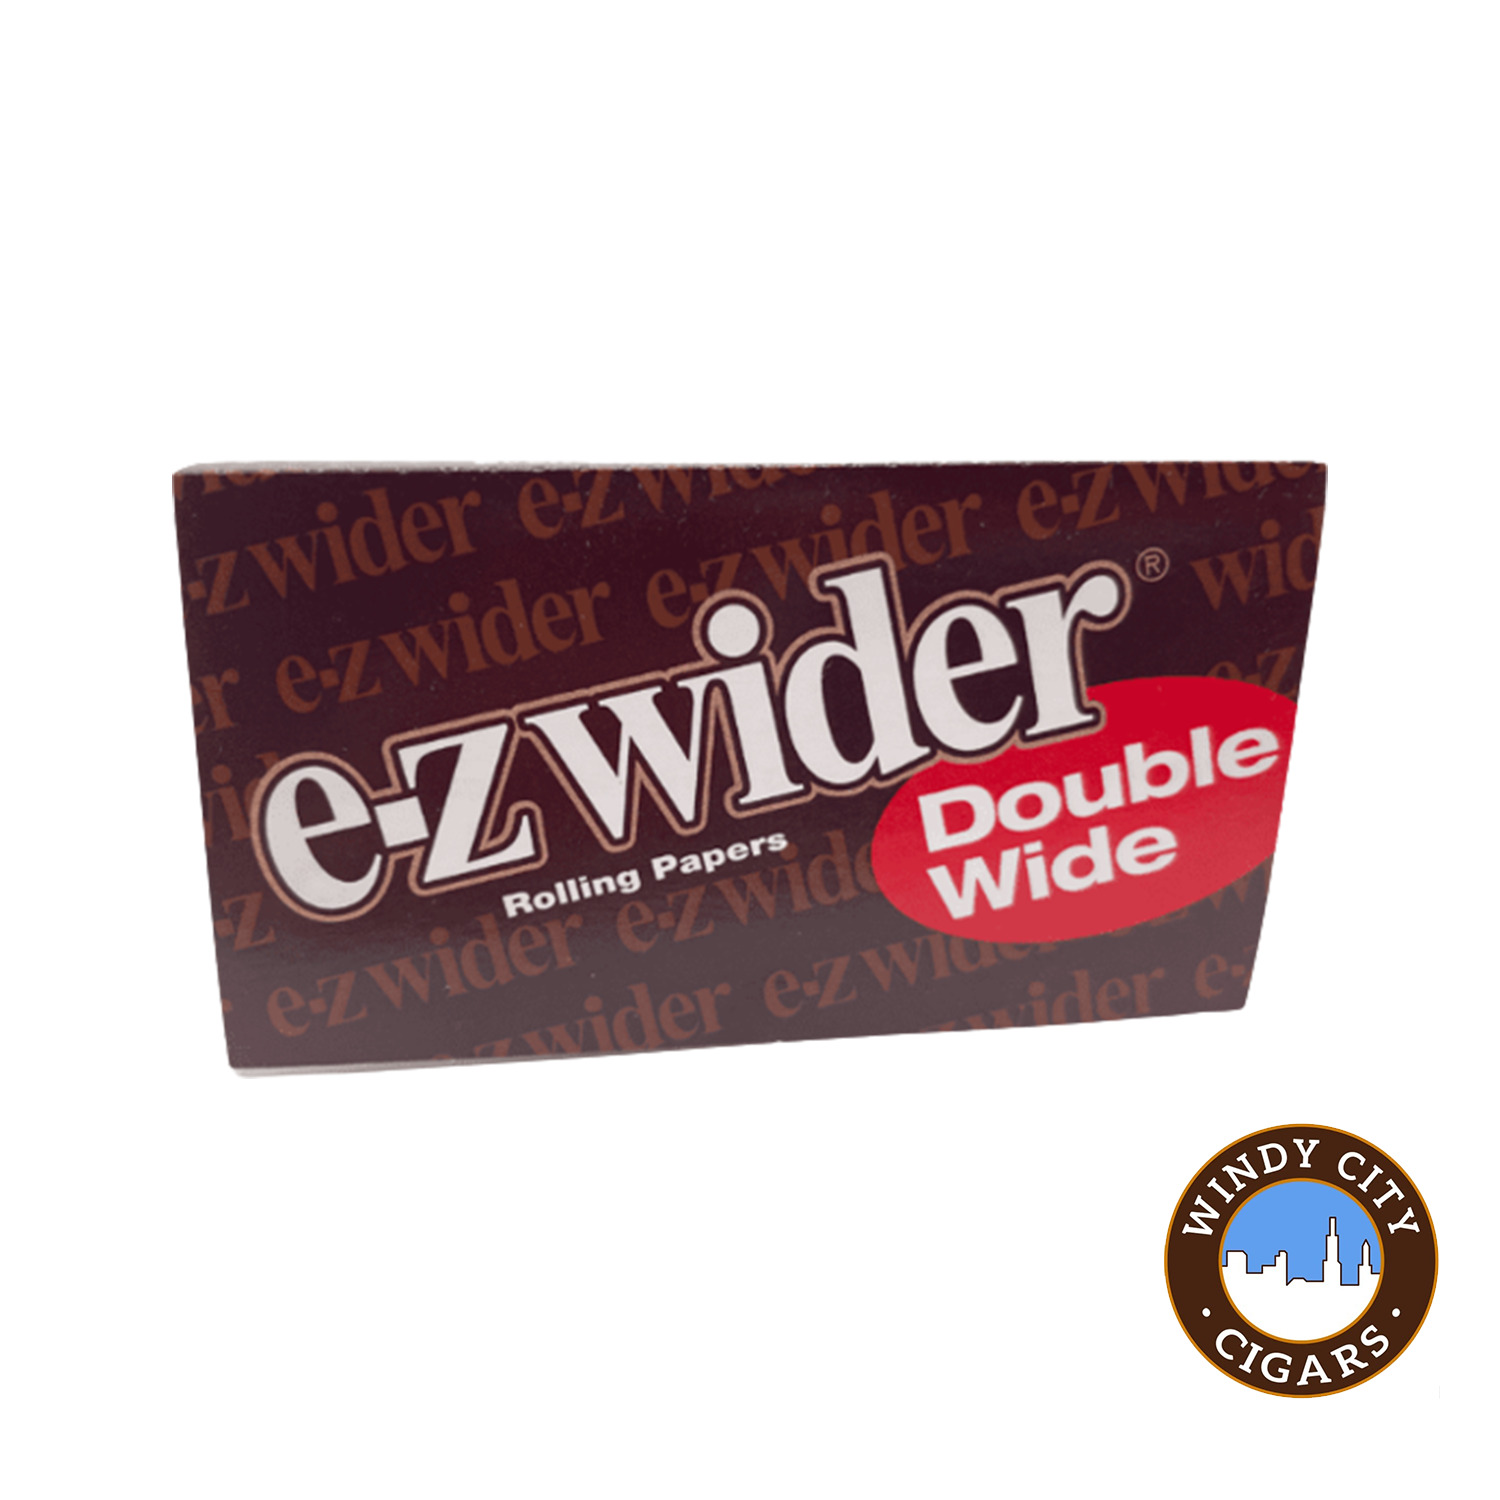 E-Z Wider Double Wide Rolling Papers - 5 Packs